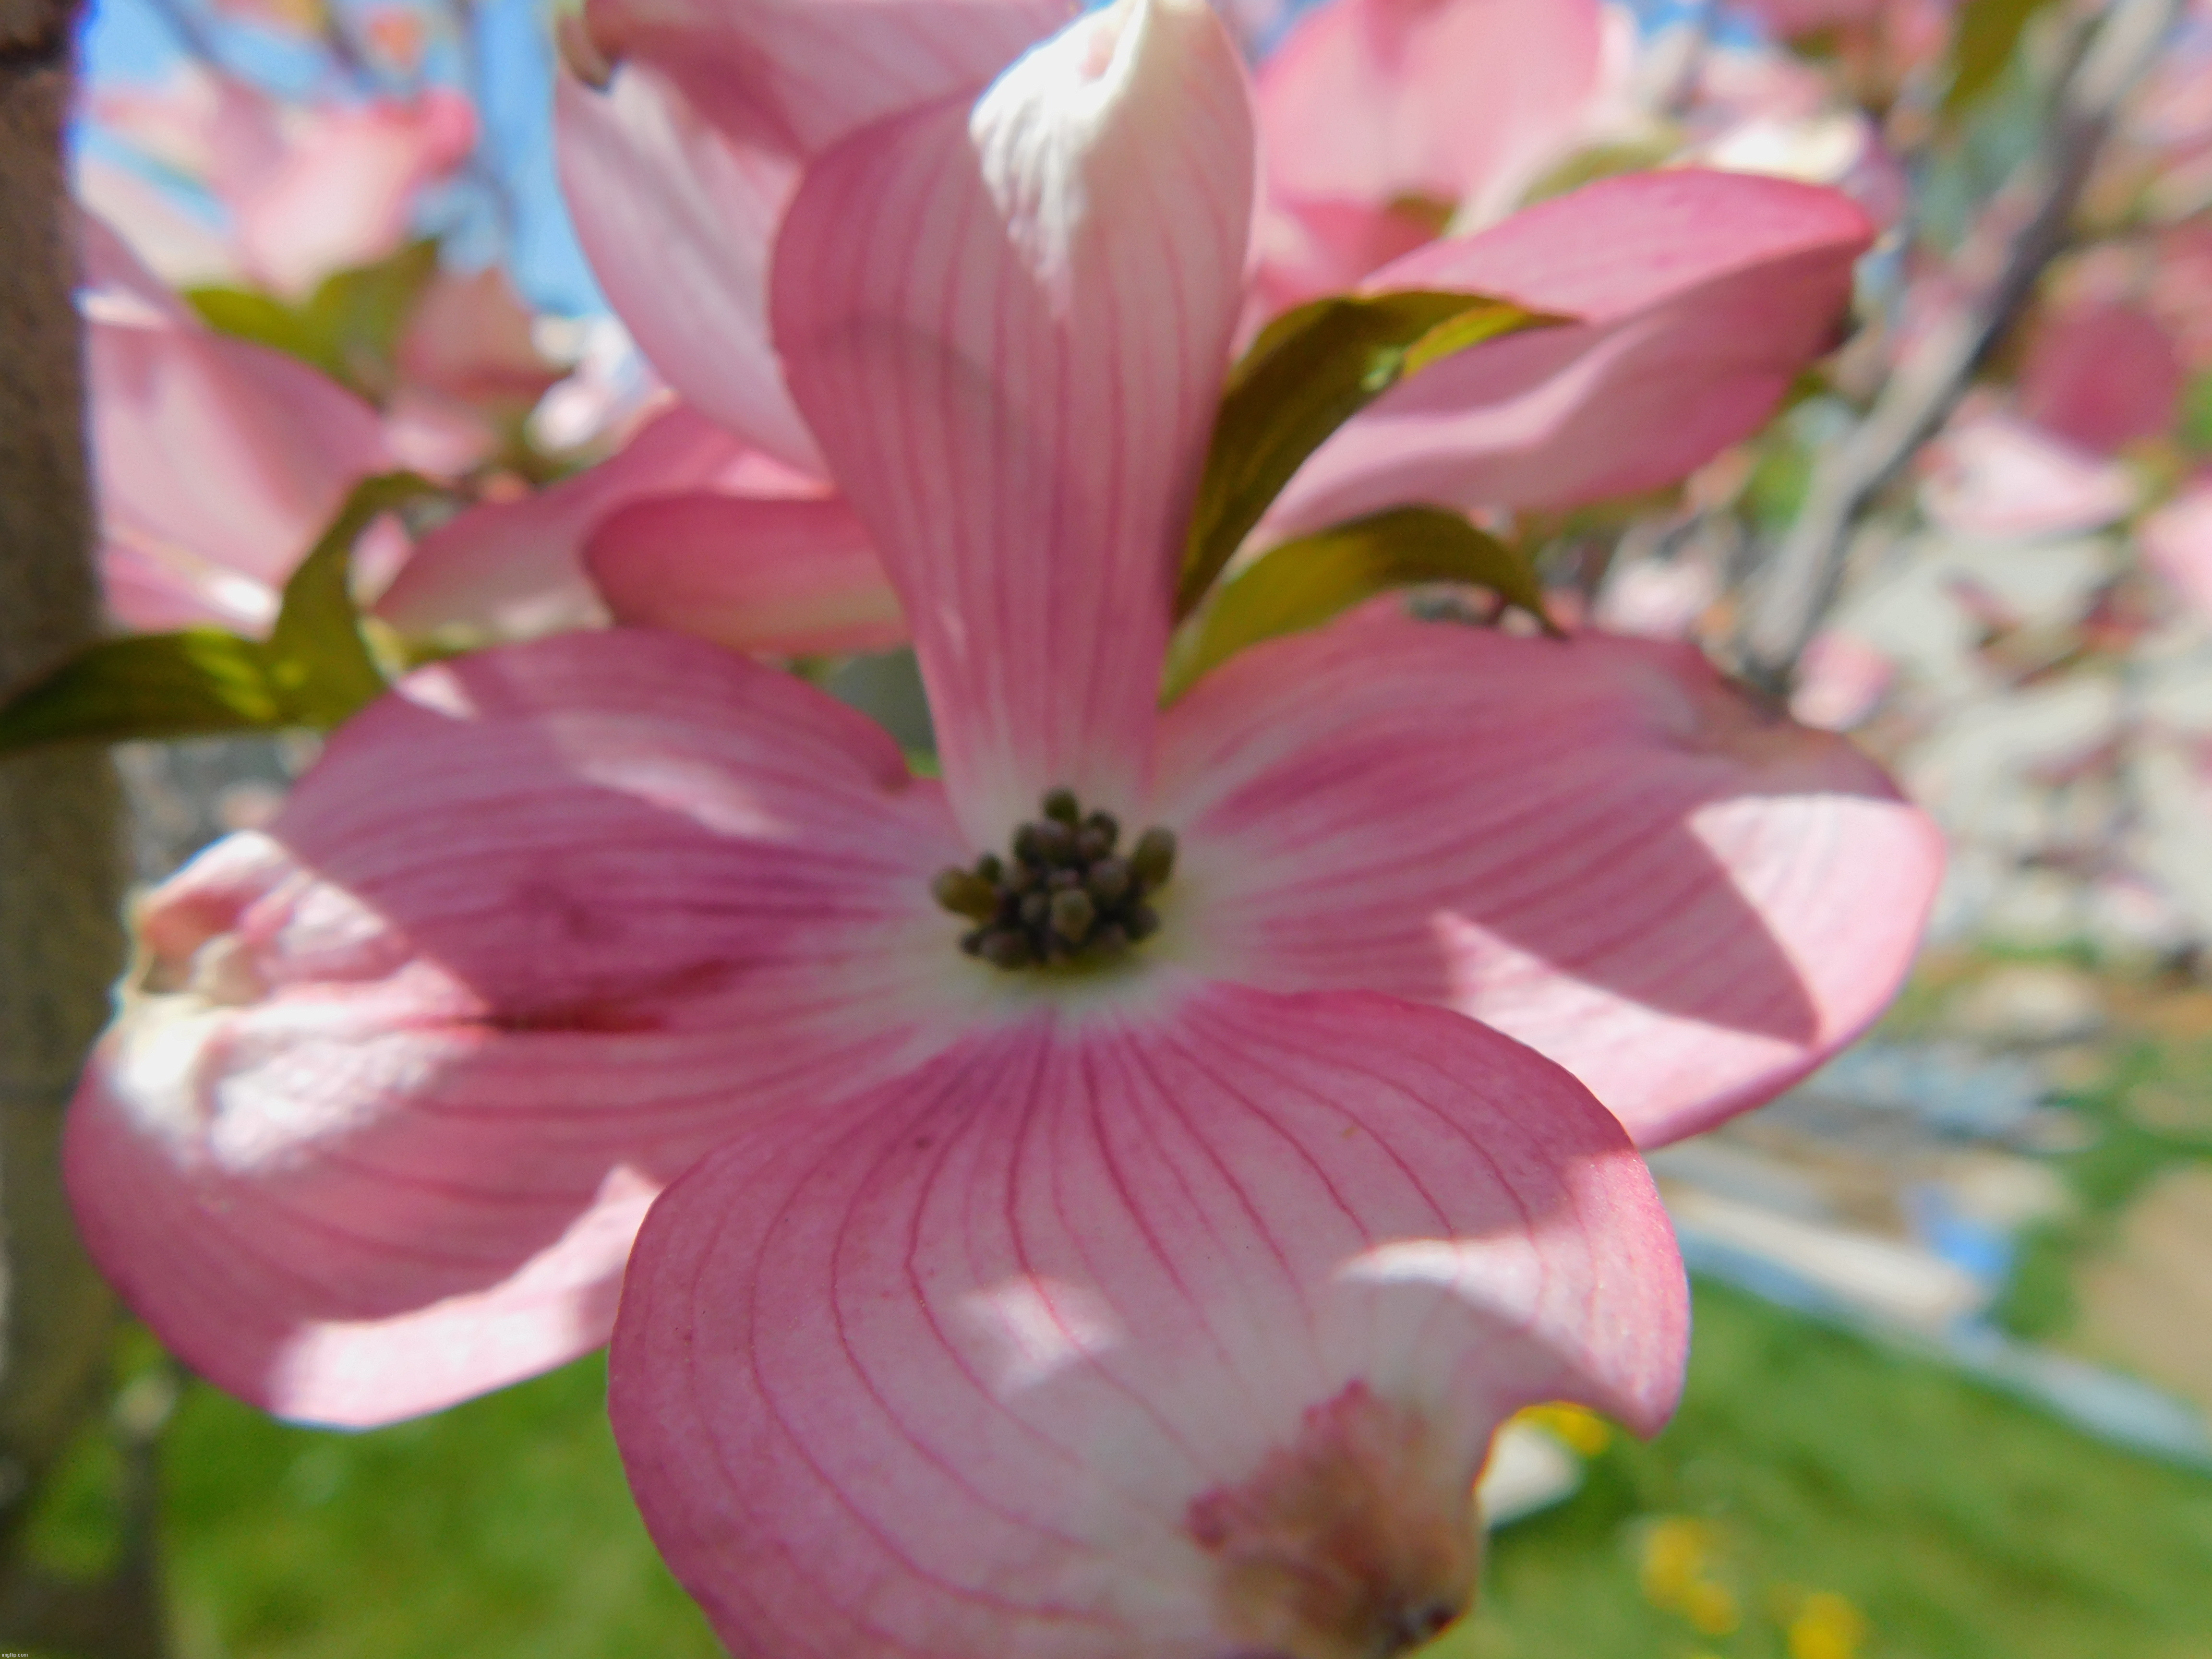 Closeup of a flower | image tagged in photography | made w/ Imgflip meme maker